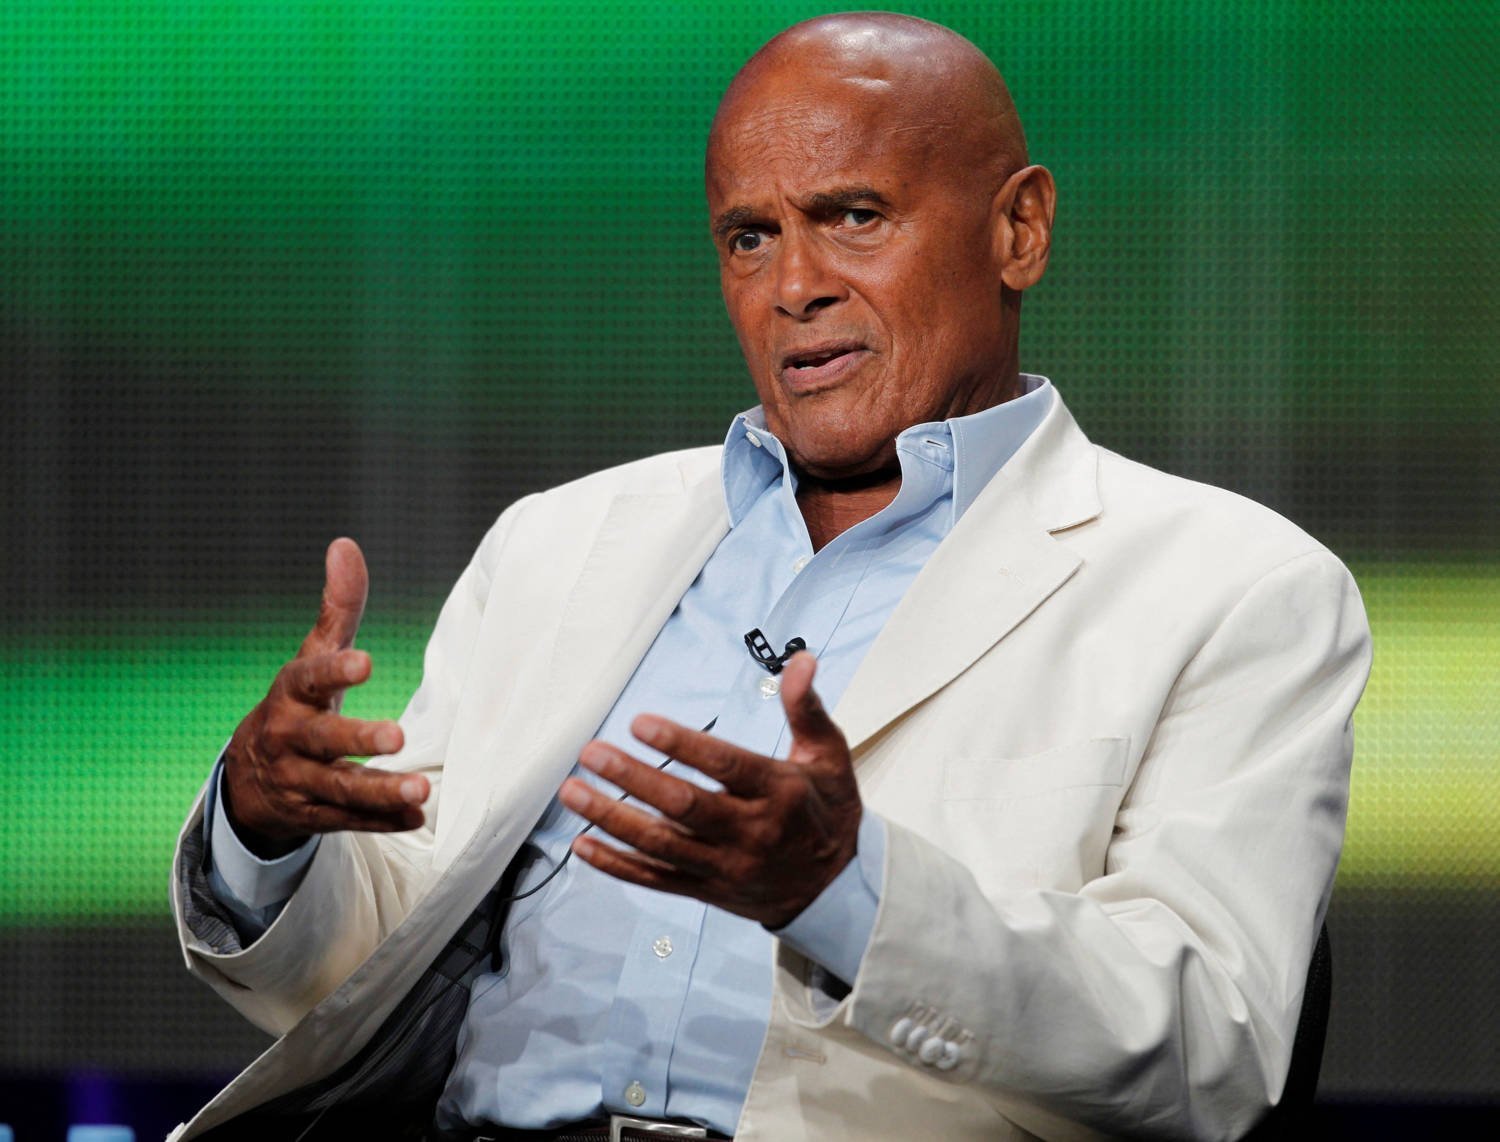 Harry Belafonte, who mixed music, acting, and activism, dies at 96 | in-cyprus.com